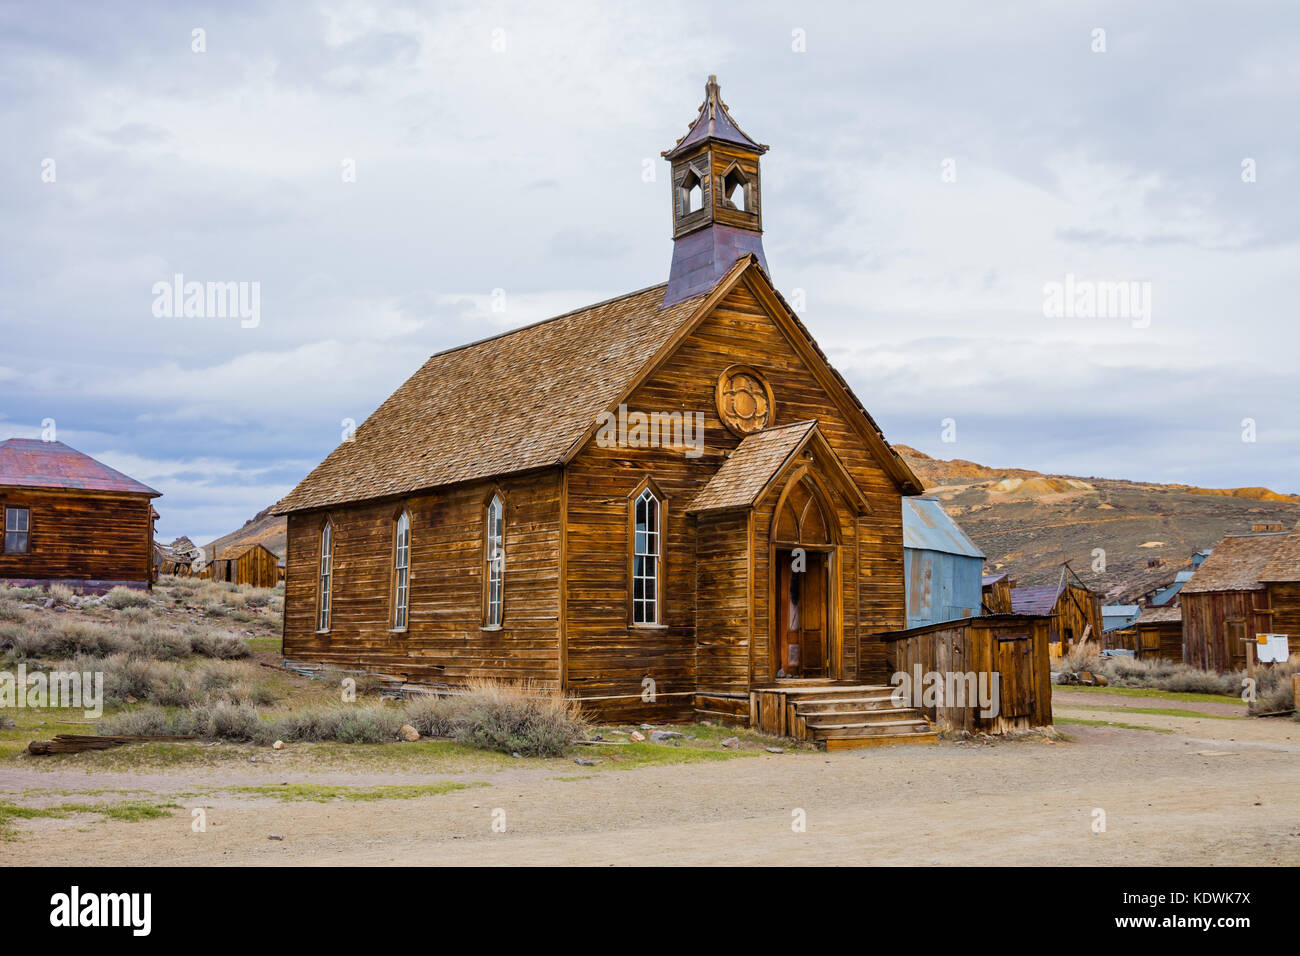 Rustic church building in Bodie town (ghost town), California Stock Photo